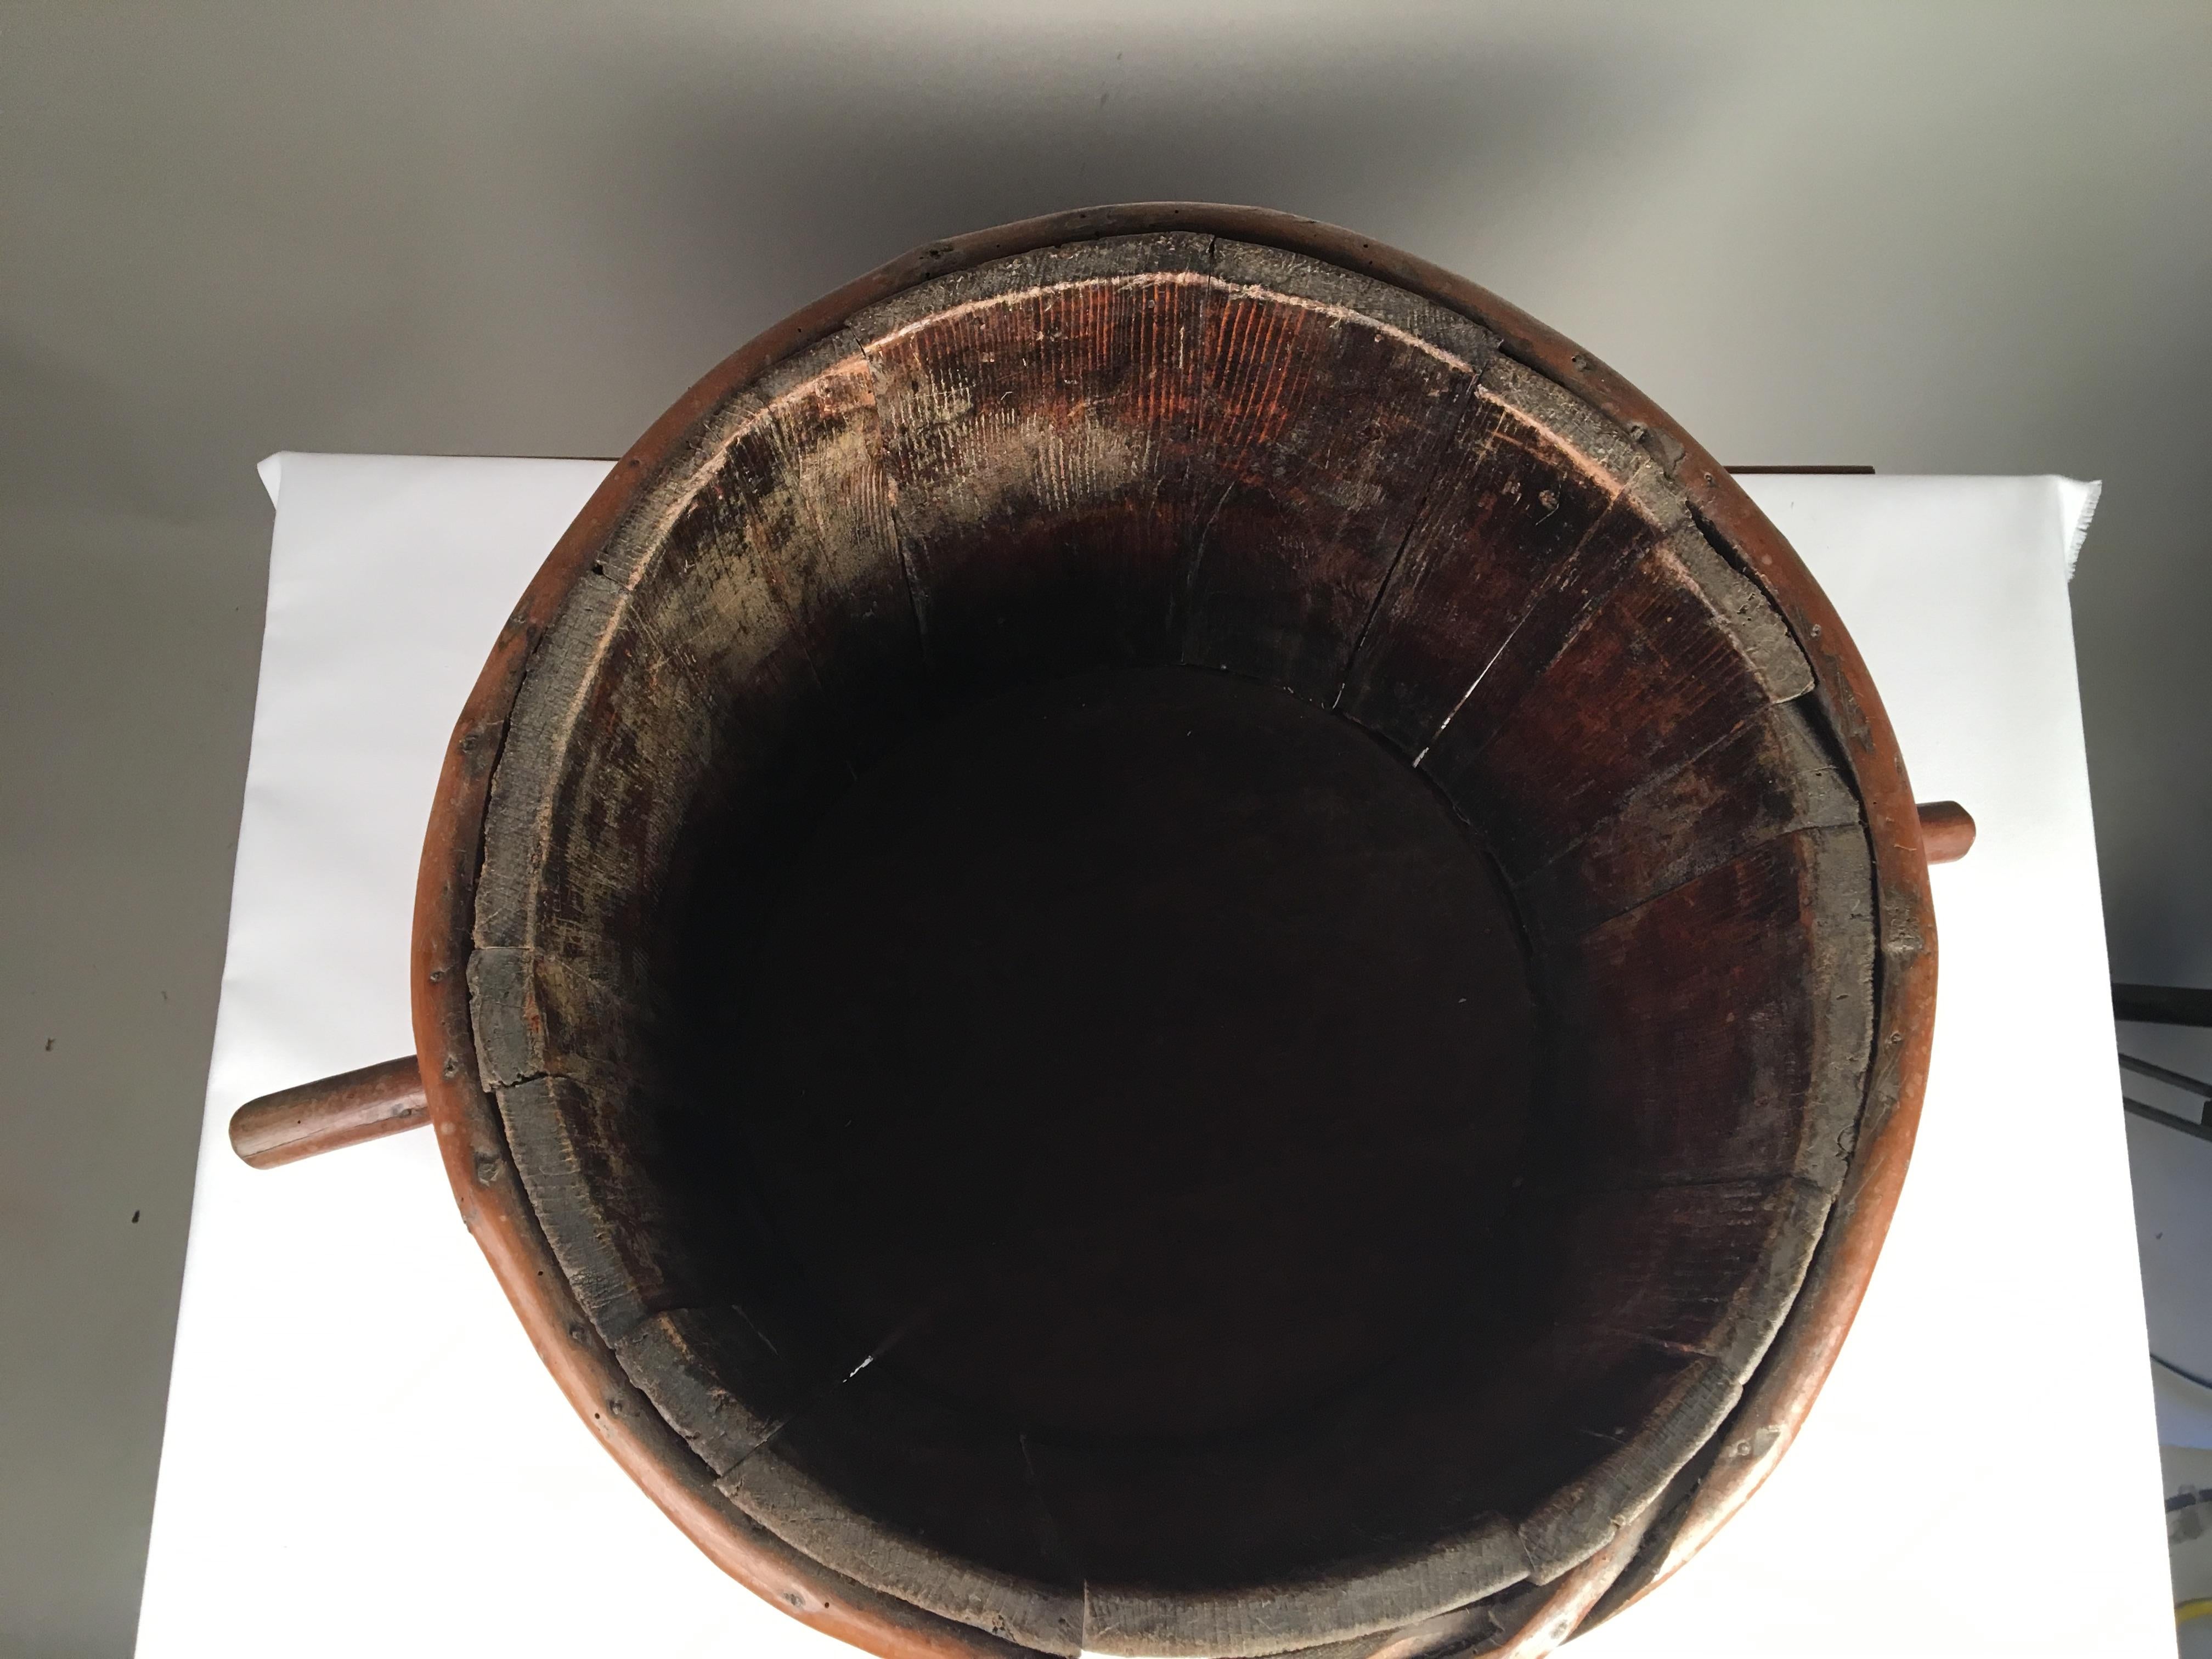 An 18th century French handmade wooden water bucket with two handles.